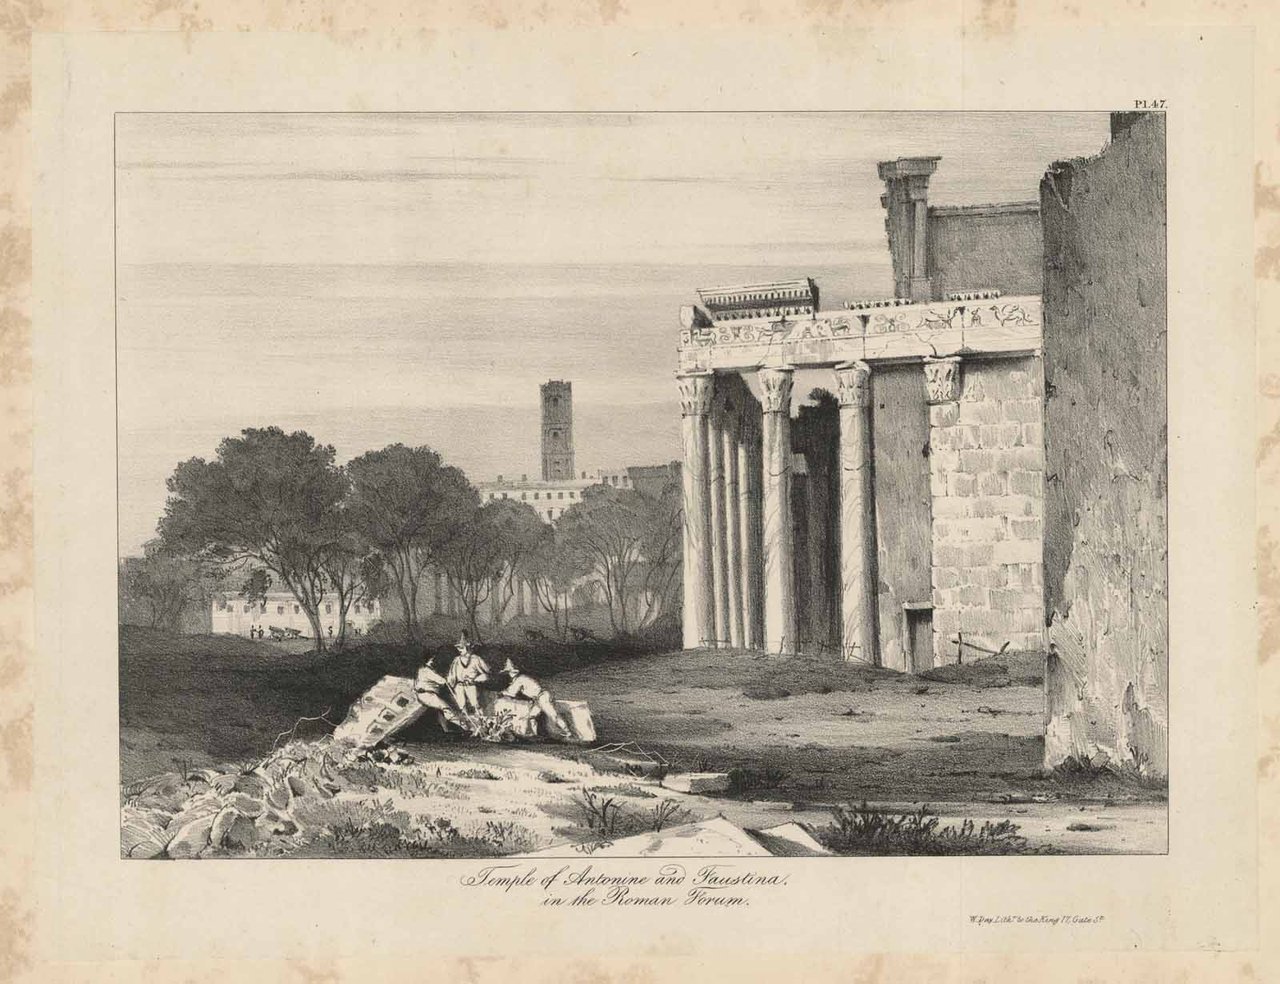 Temple of Antonine and Faustina in the Roman Forum